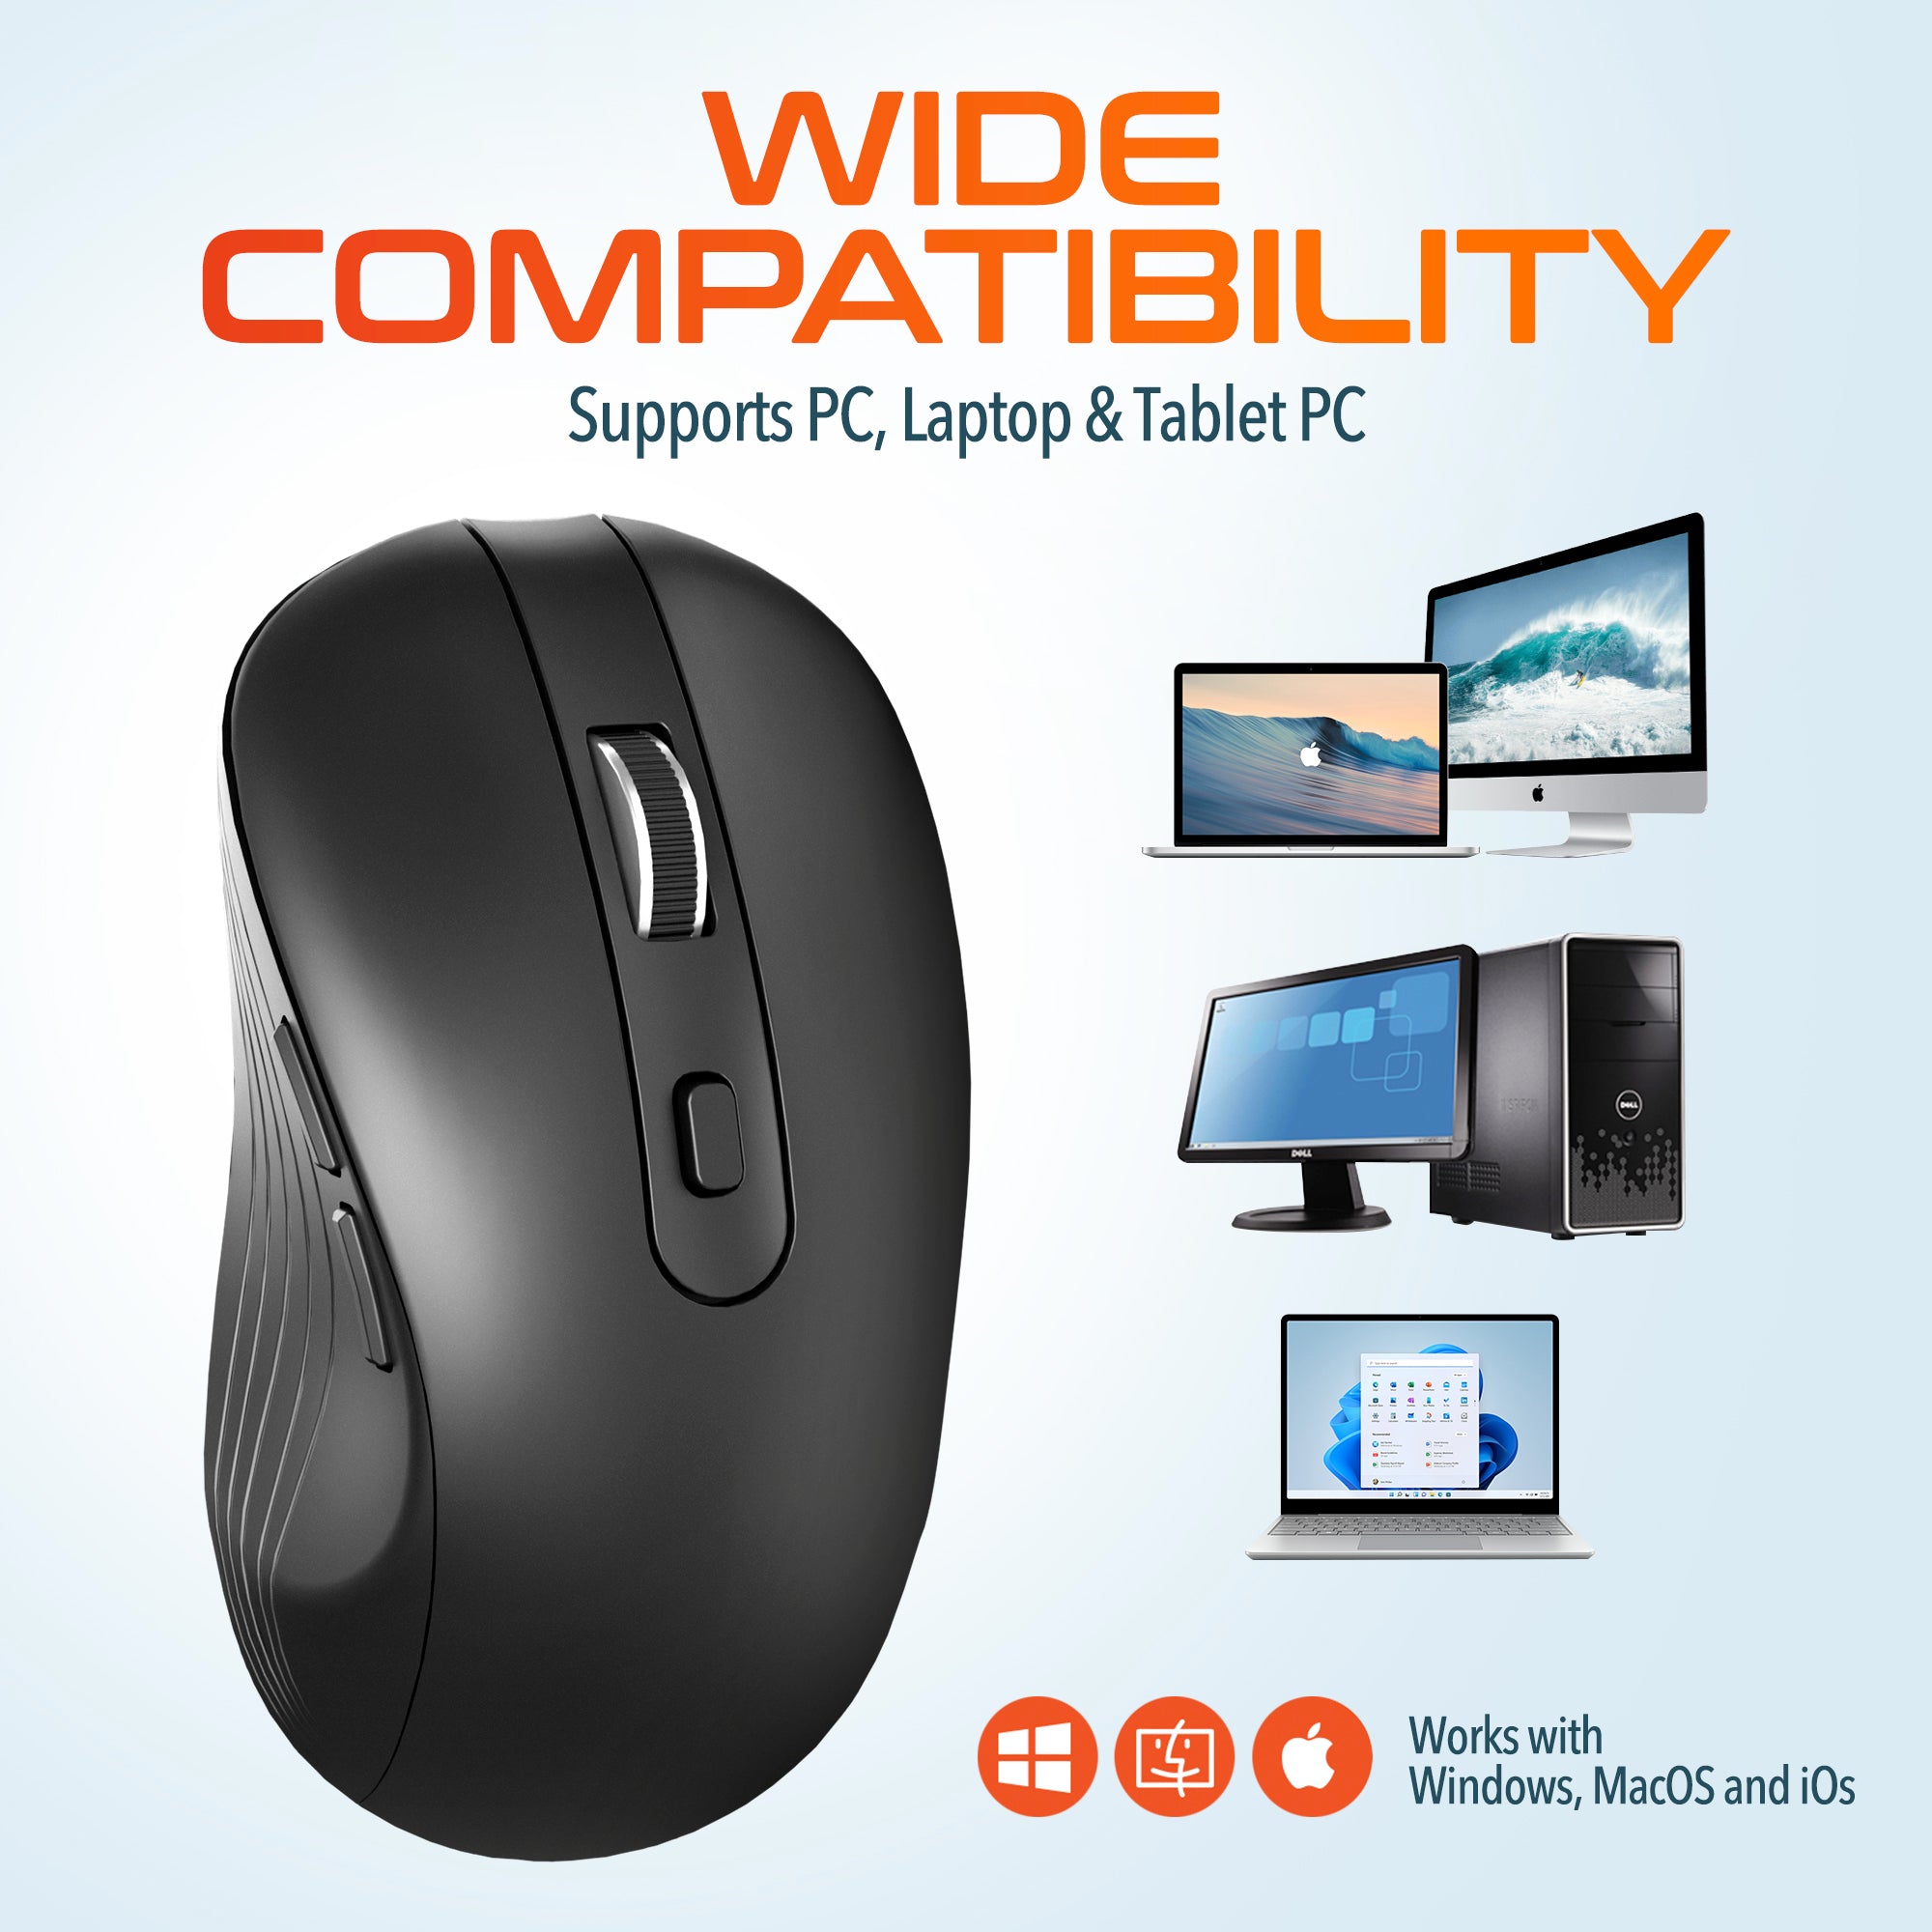 Delton S8/D101 Wireless Mouse and Non-Skid Mouse Pad